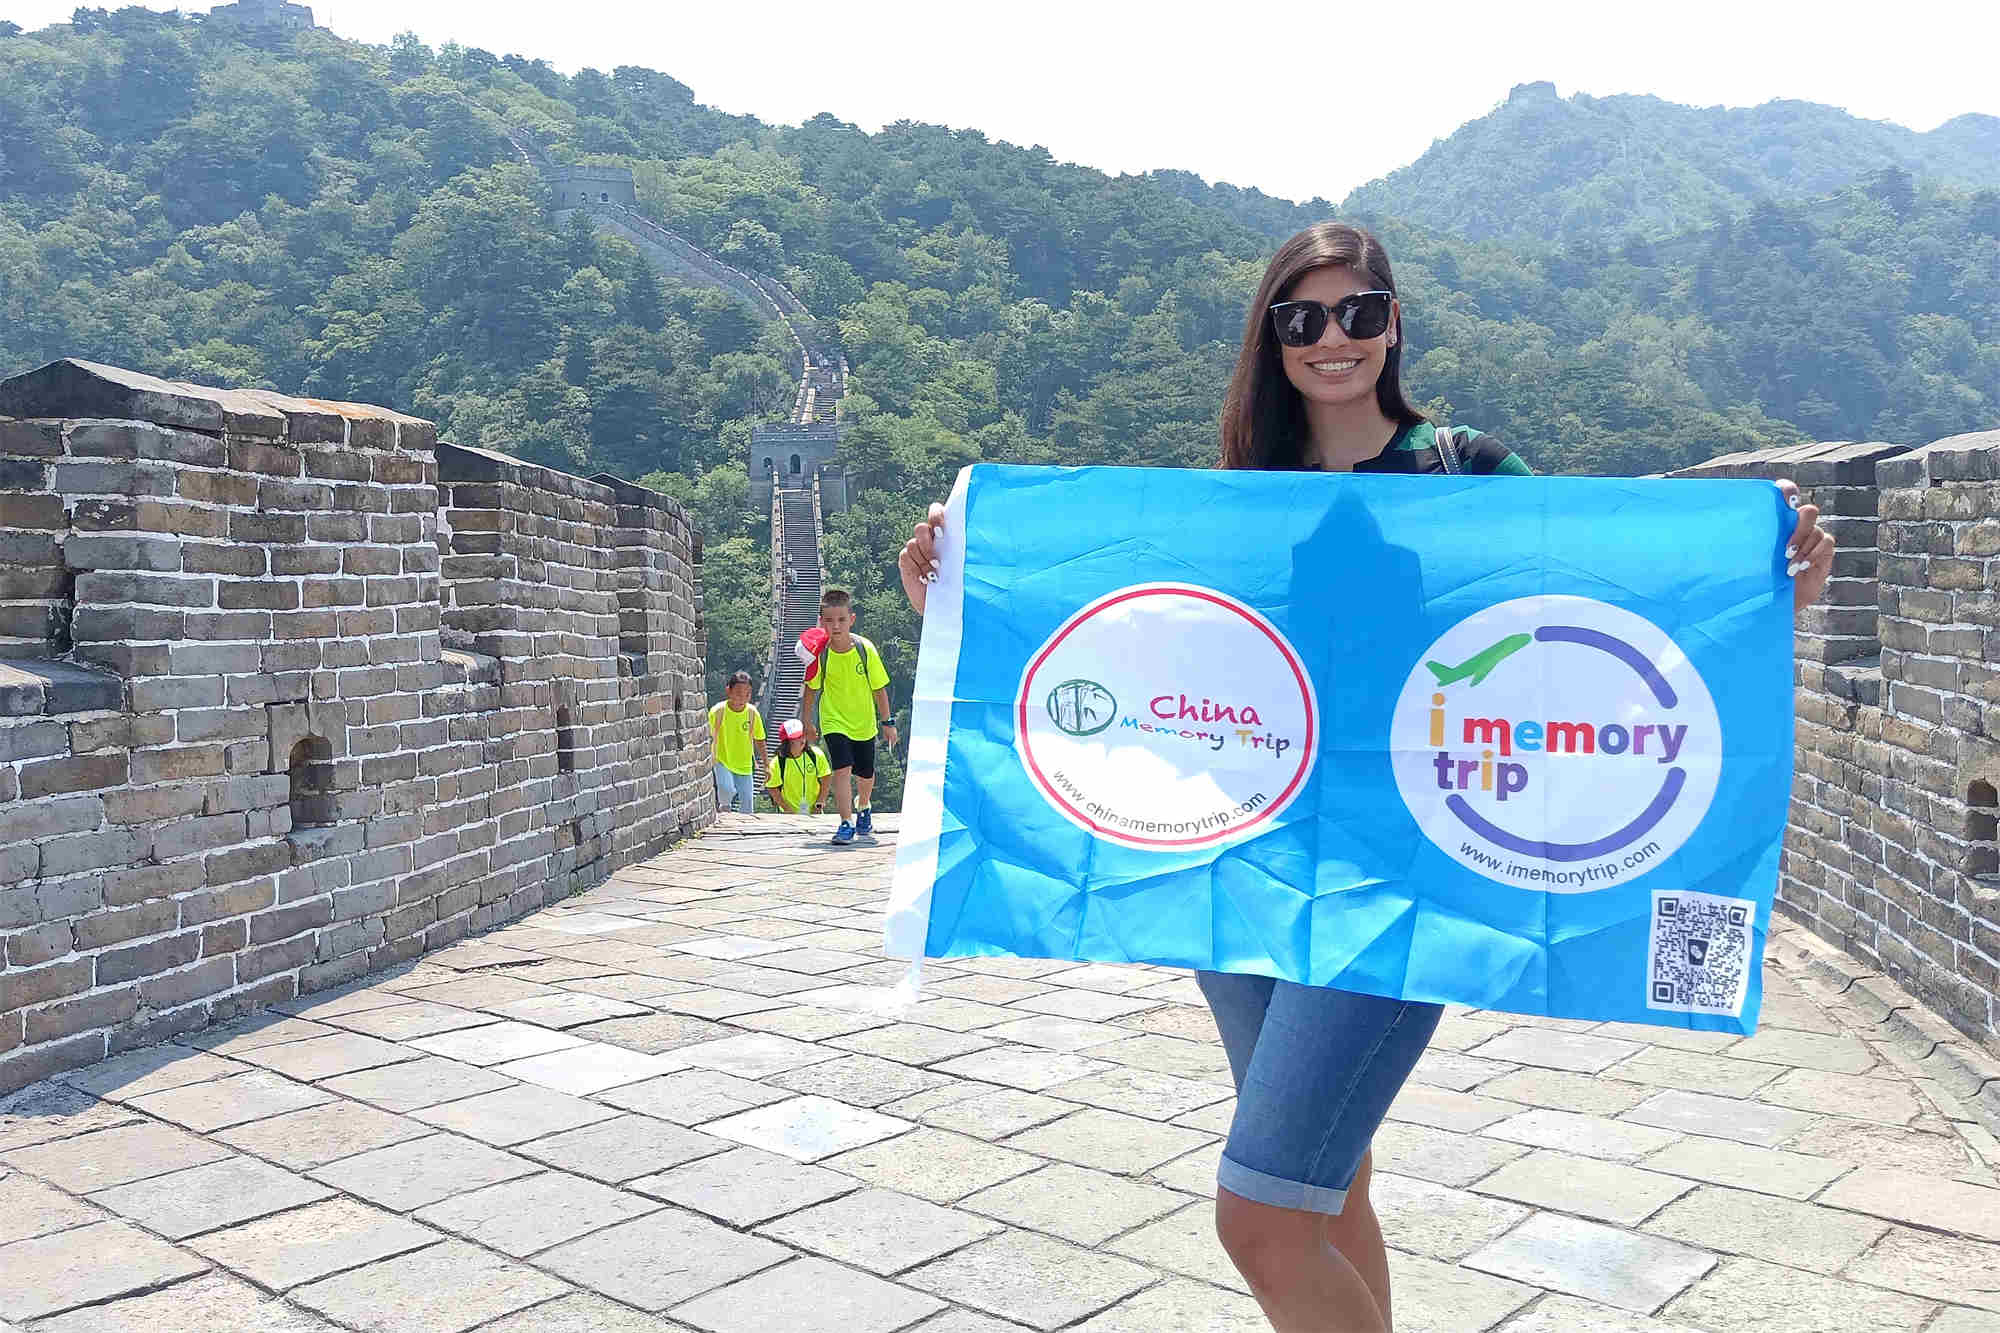 Beijing Private Day Tour Optional Badaling or Mutianyu Great Wall and Summer Palace